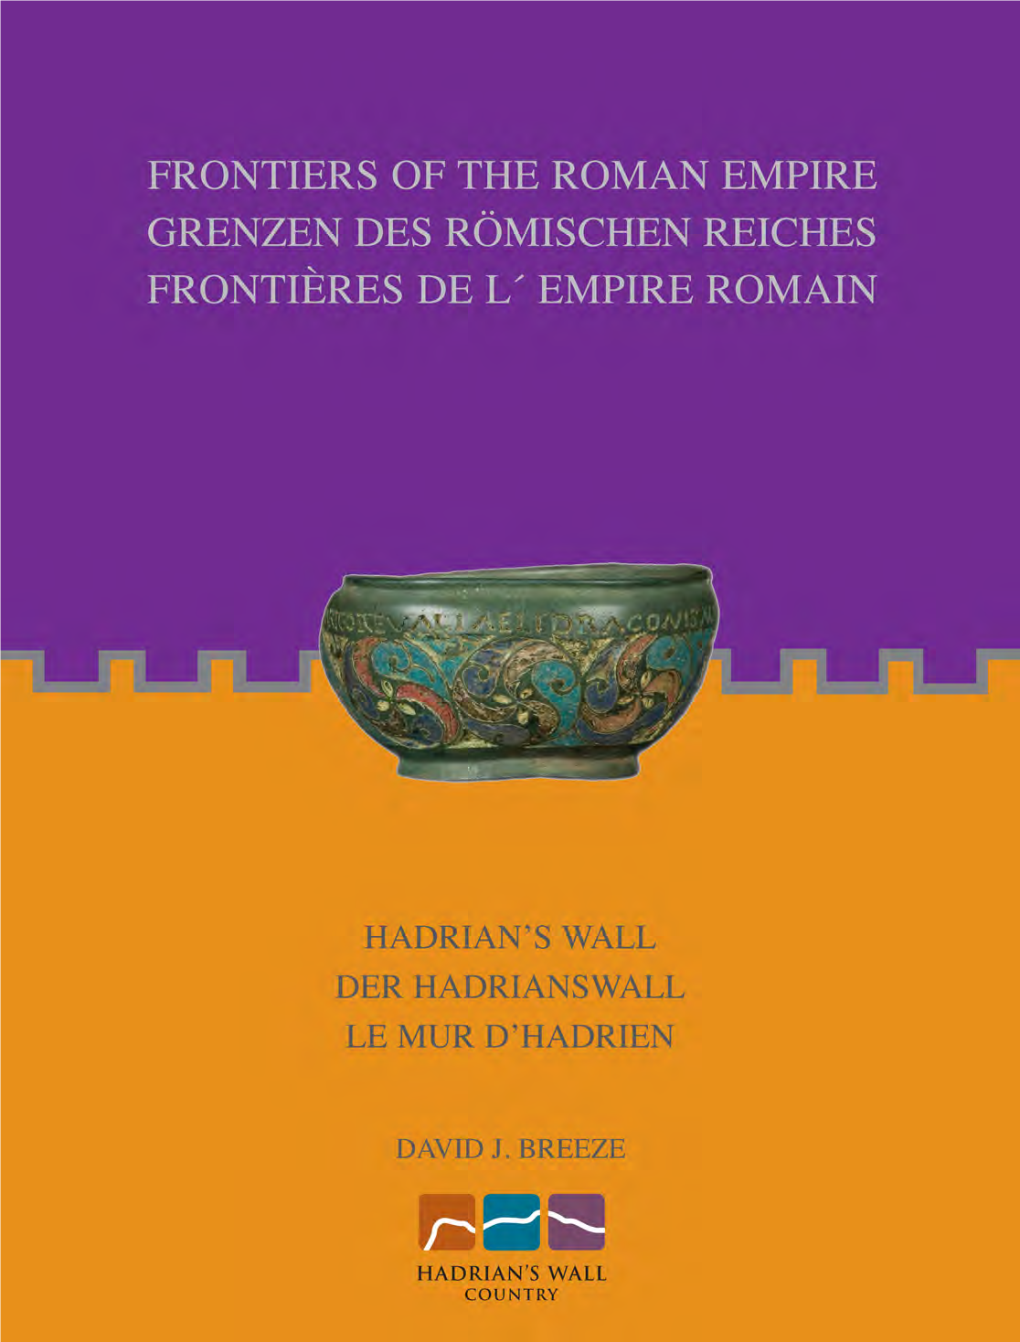 The Northern Frontiers of Roman Britain by David J. Breeze